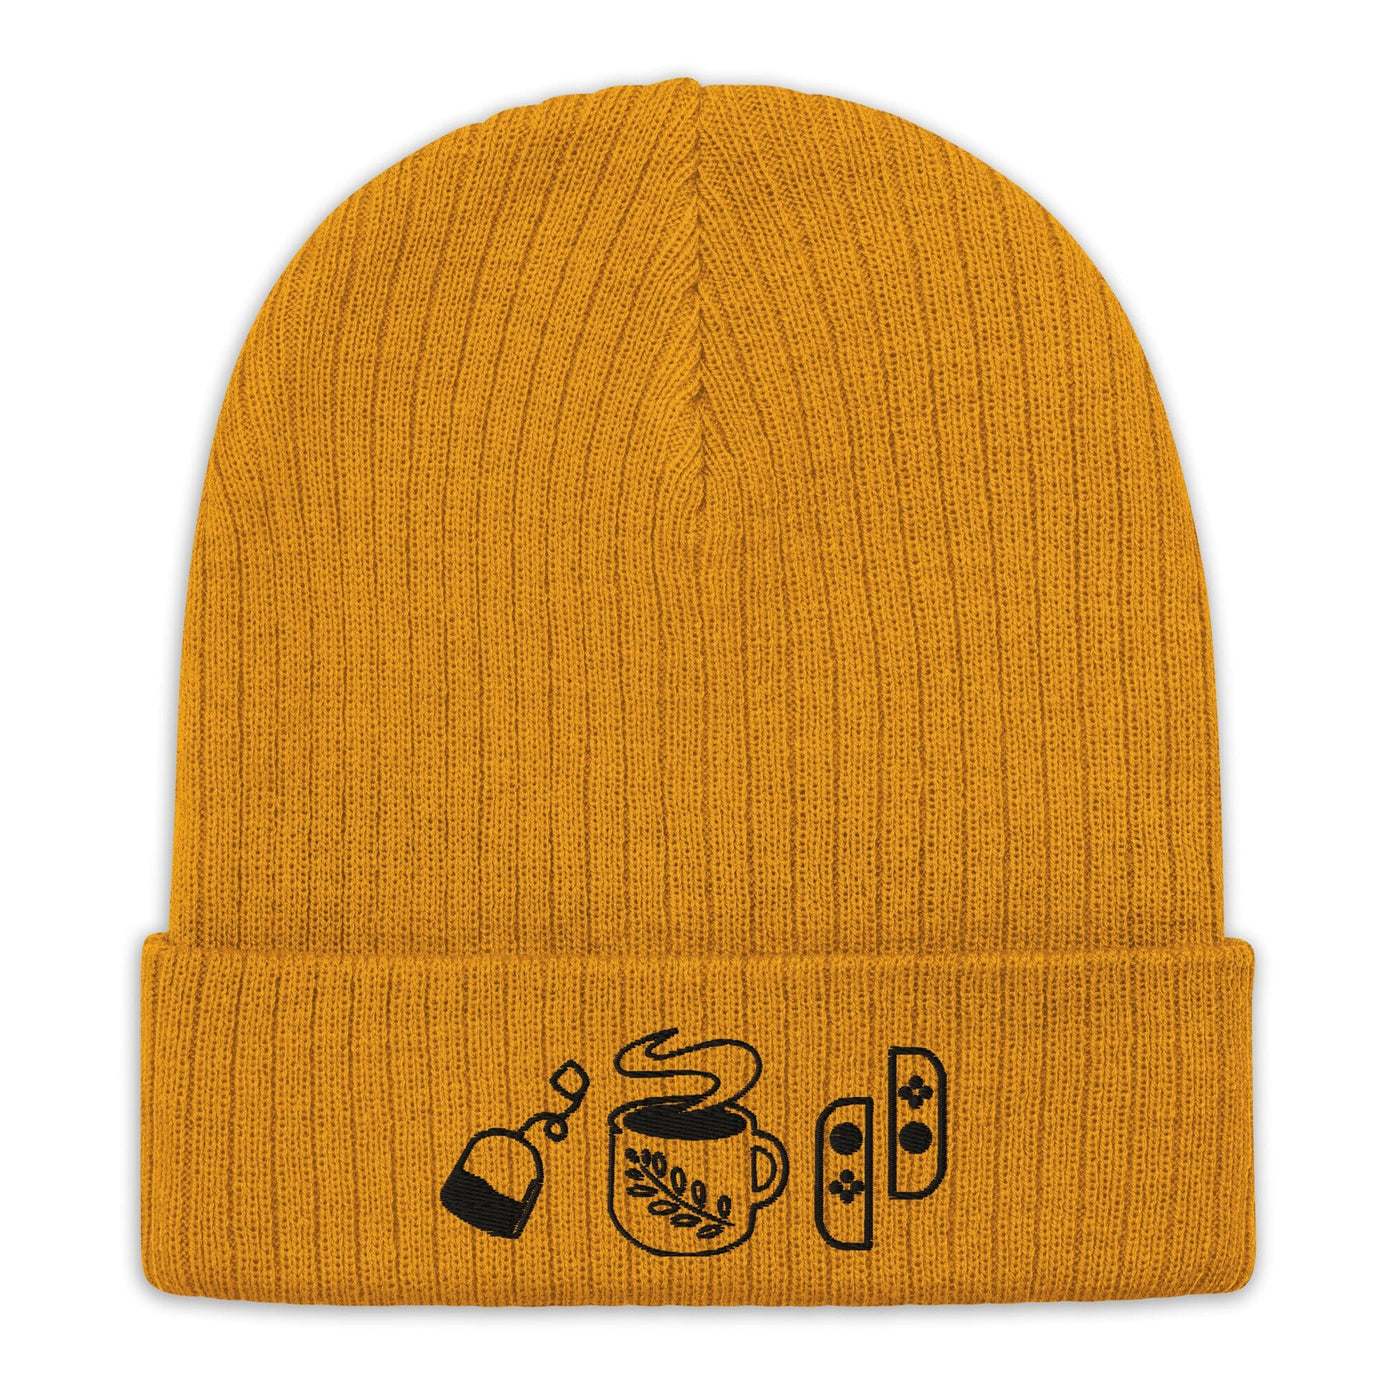 Cozy Hobbies | Ribbed knit beanie | Cozy Gamer Threads & Thistles Inventory Mustard 